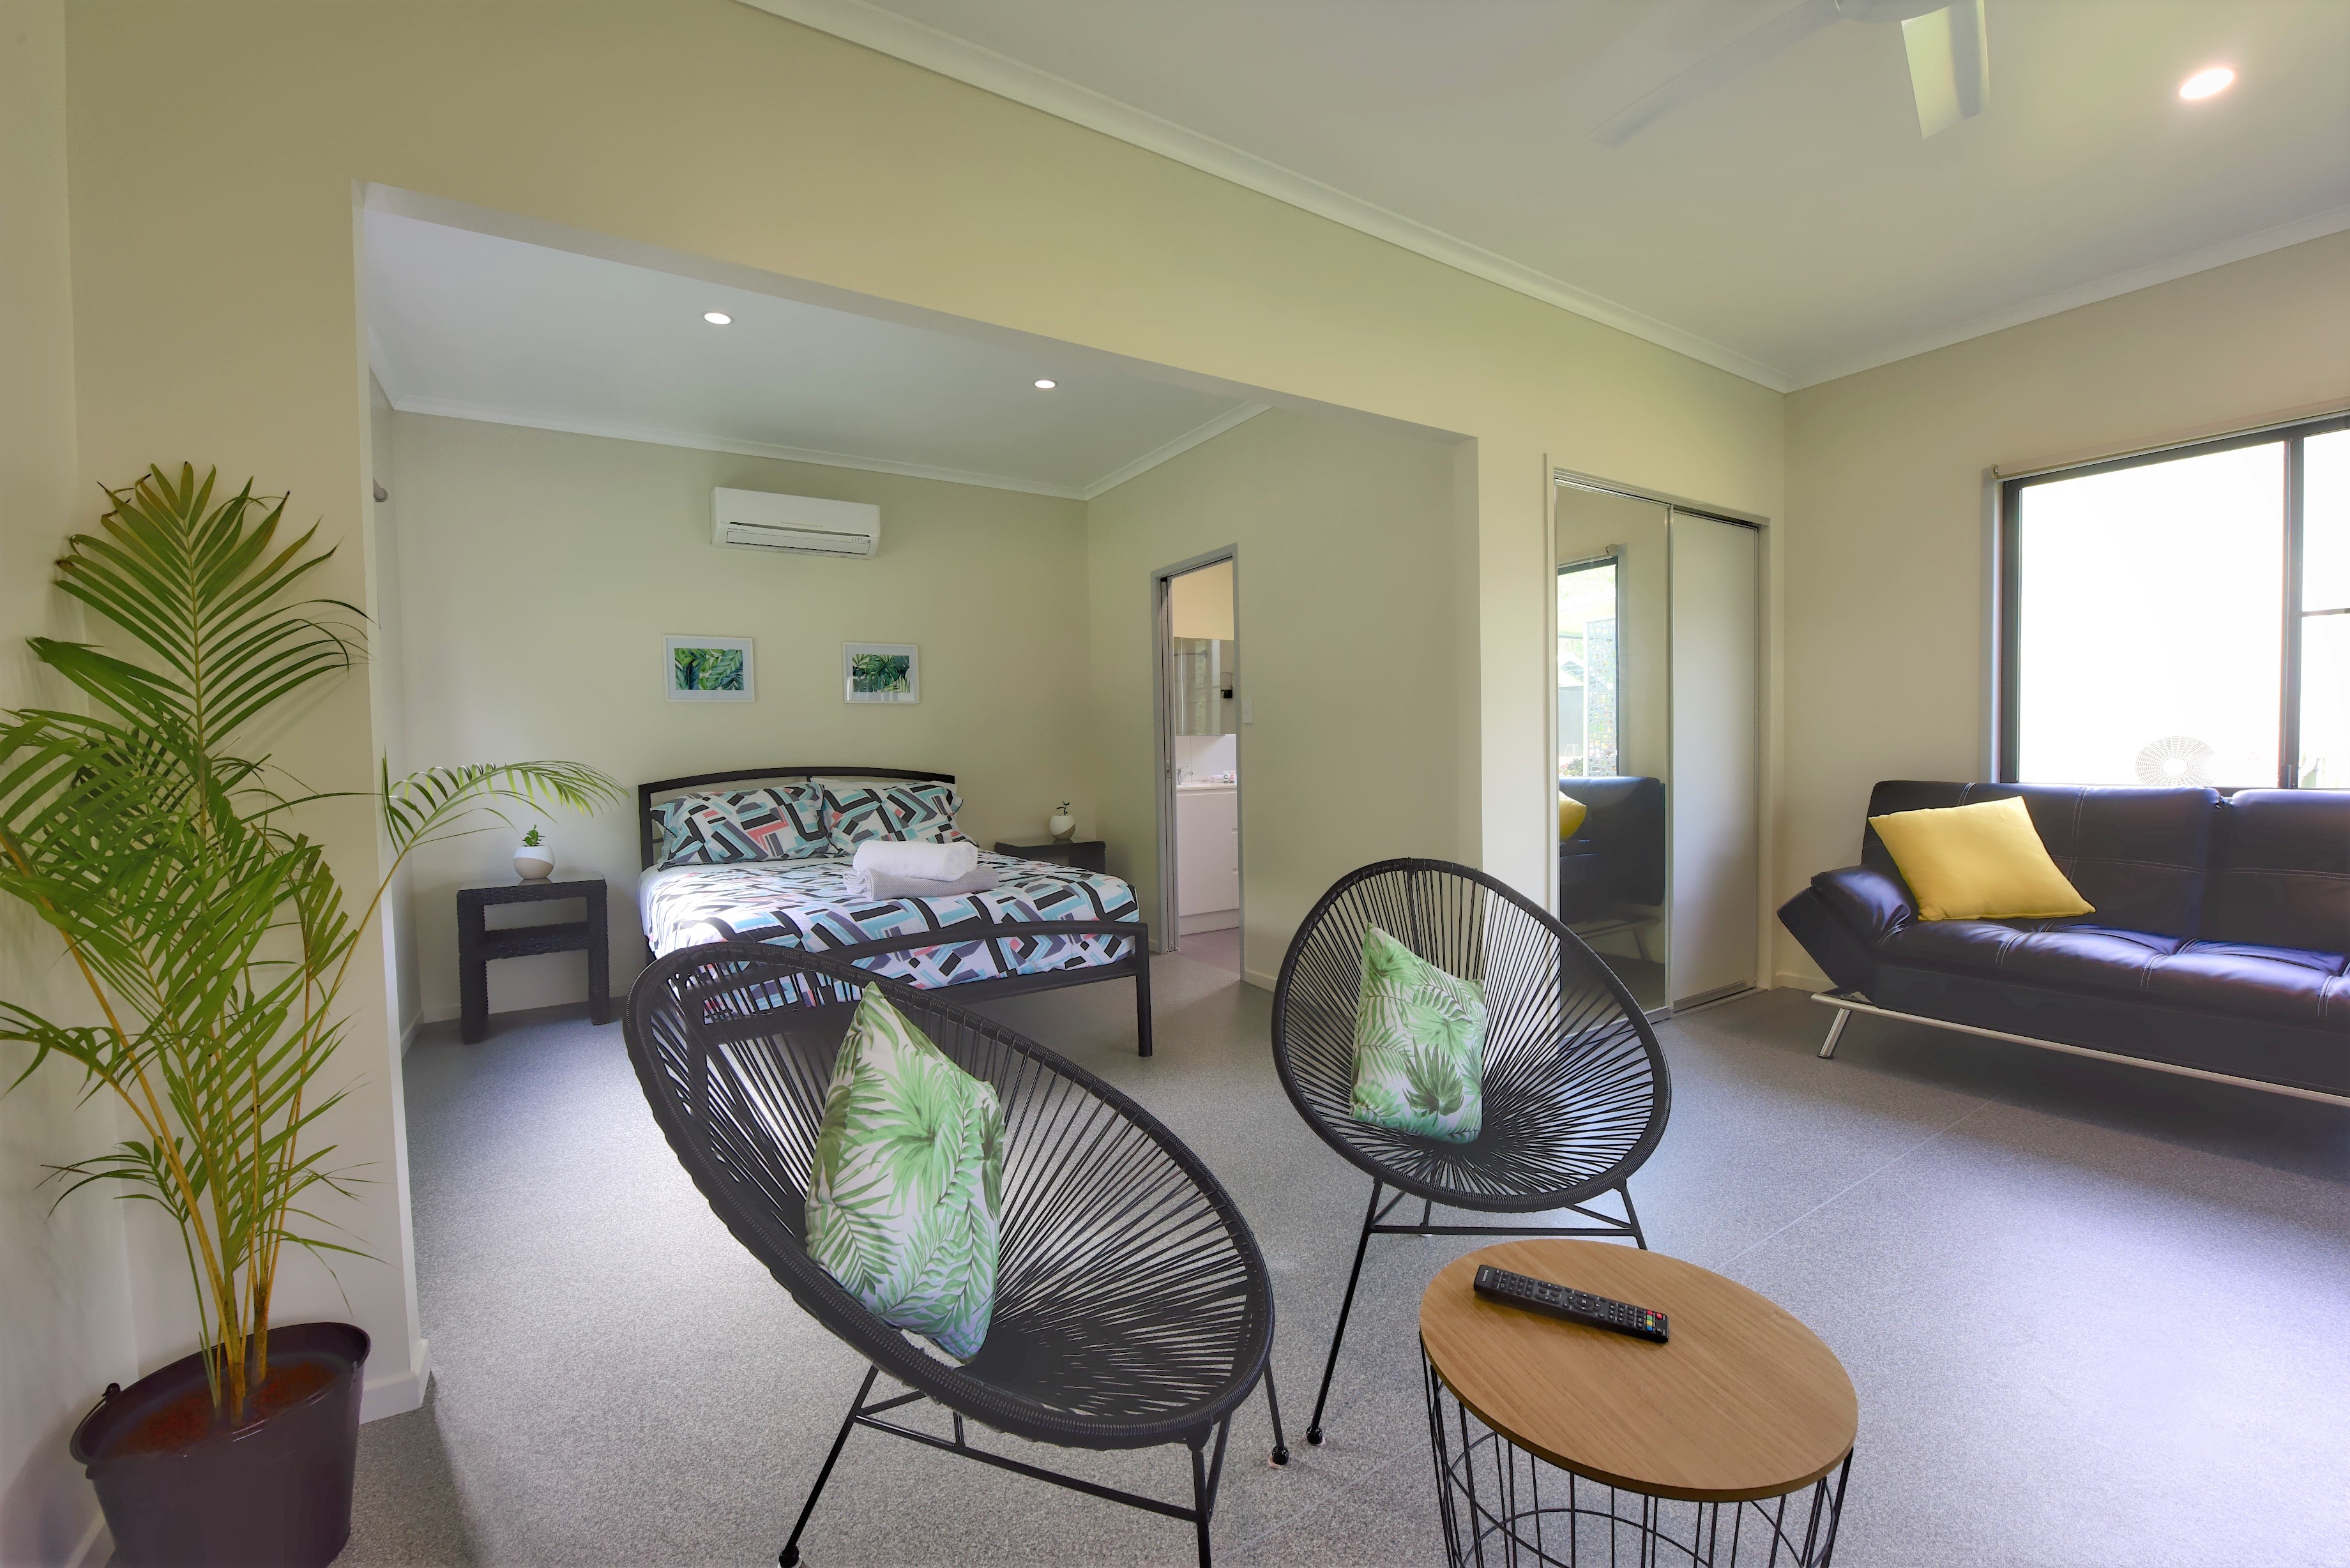 Accommodation with queens bed and extra sofa bed.